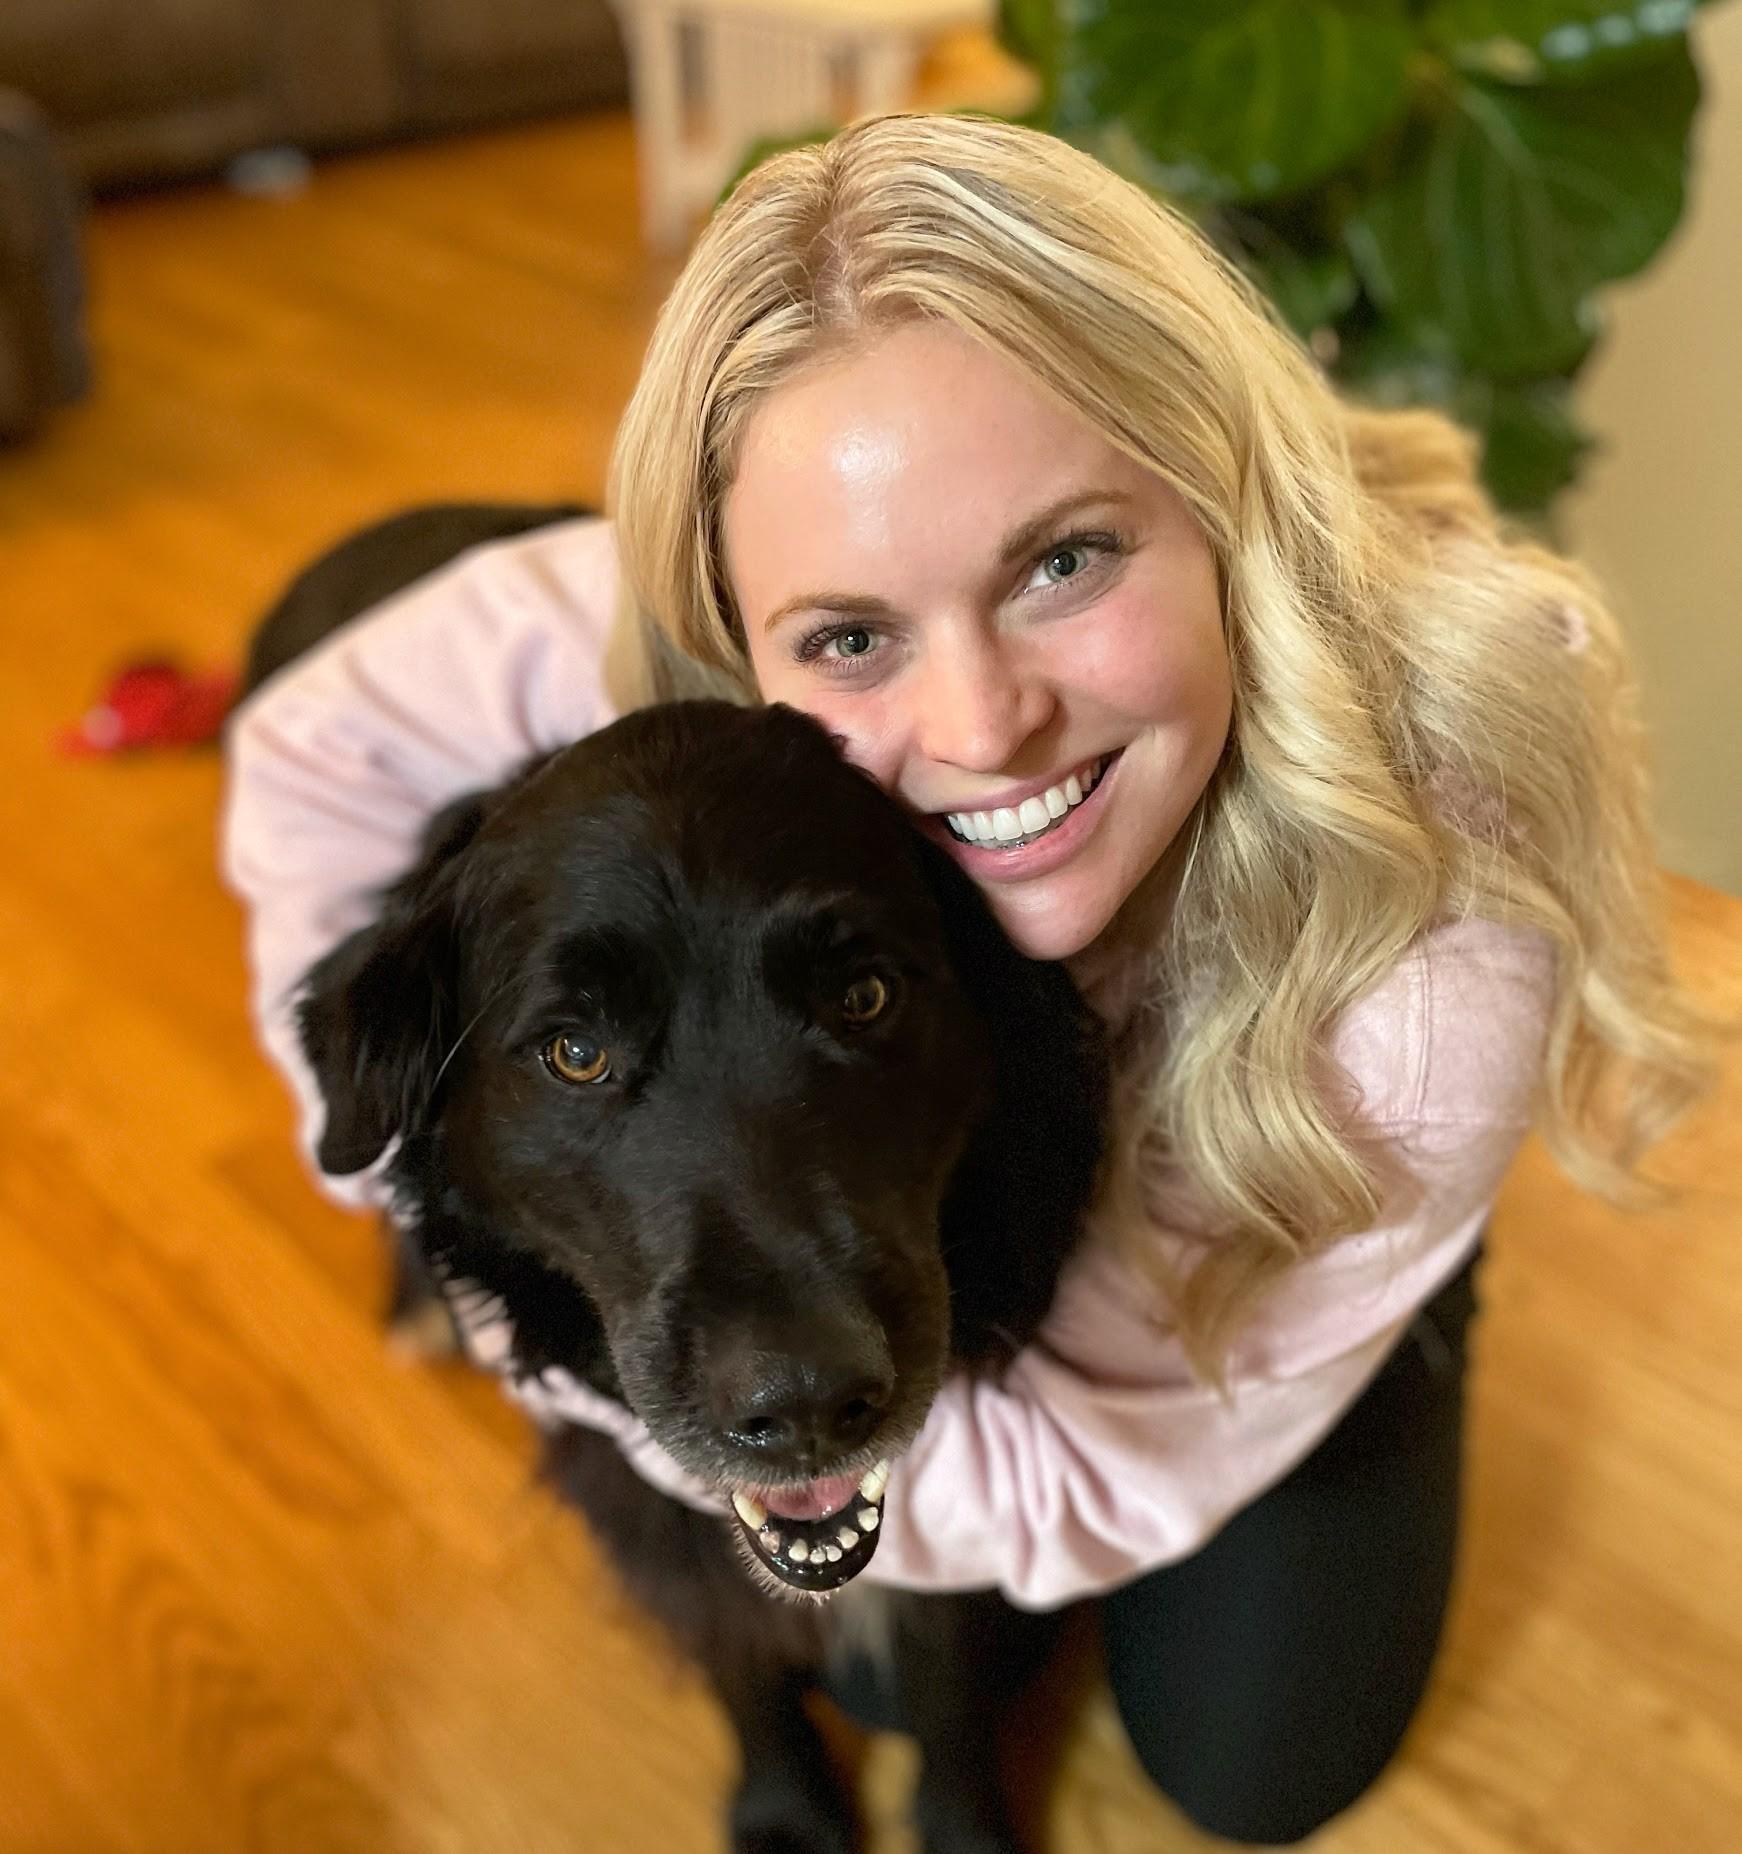 A woman smiles with a big black dog. Both are looking at the camera.